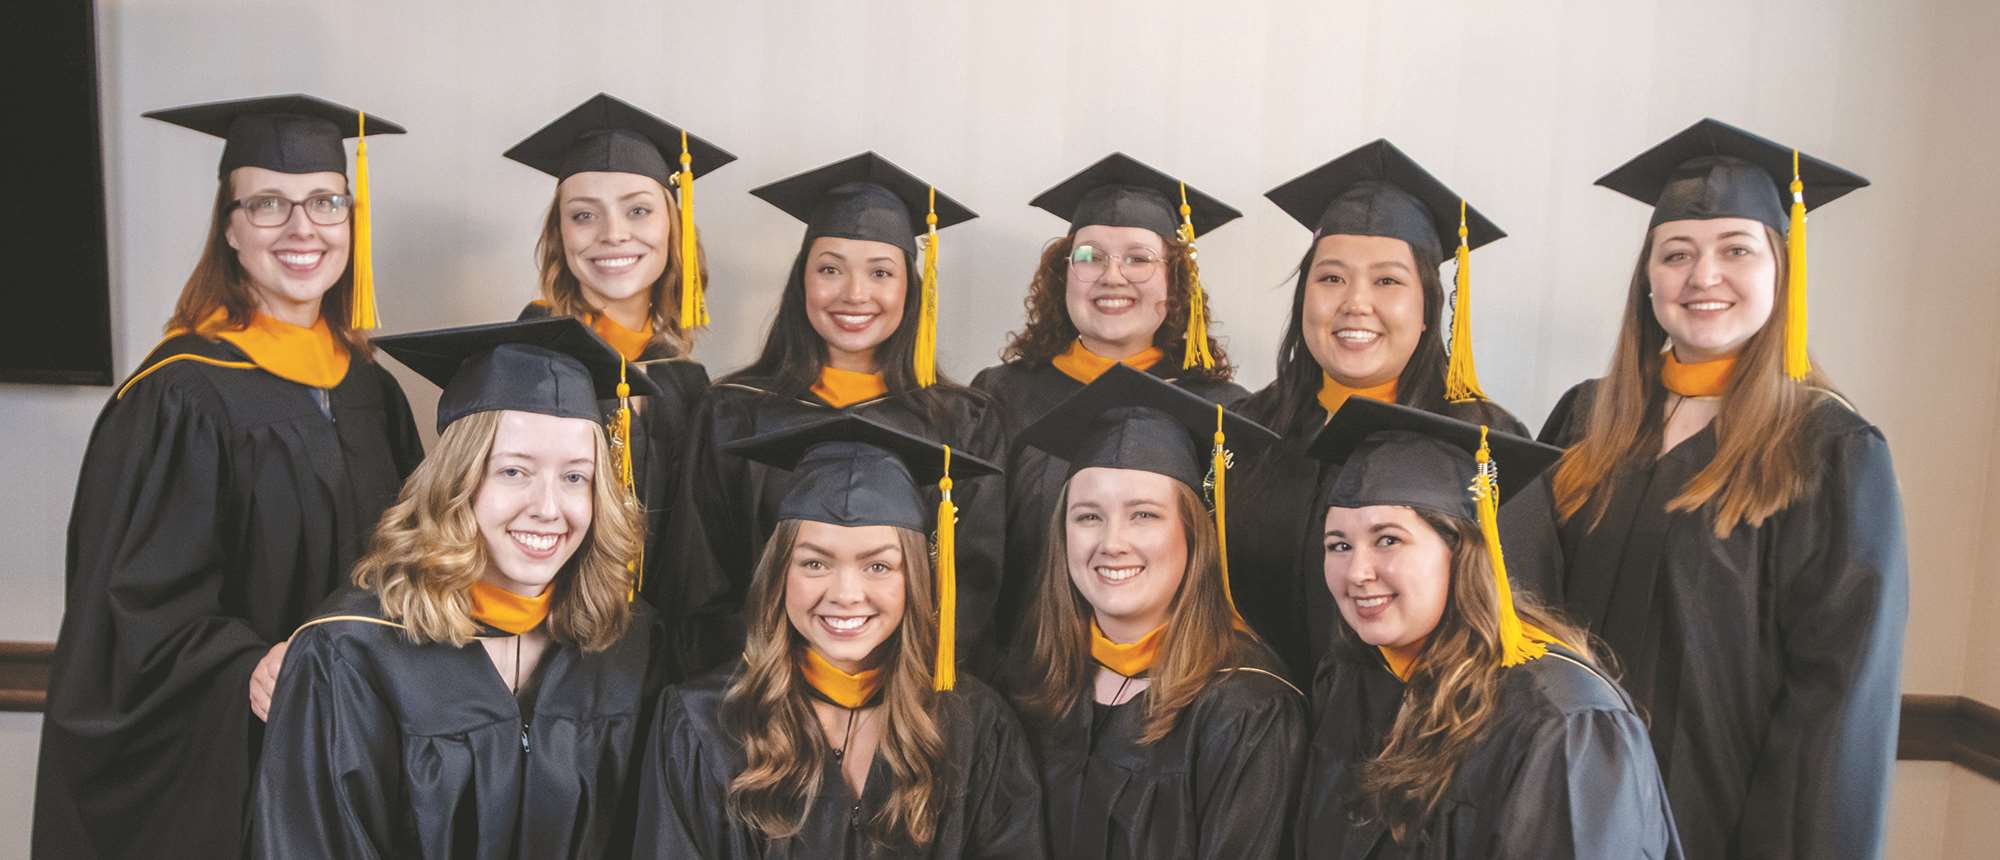 MCW MS in Genetic Counseling Program graduates first class